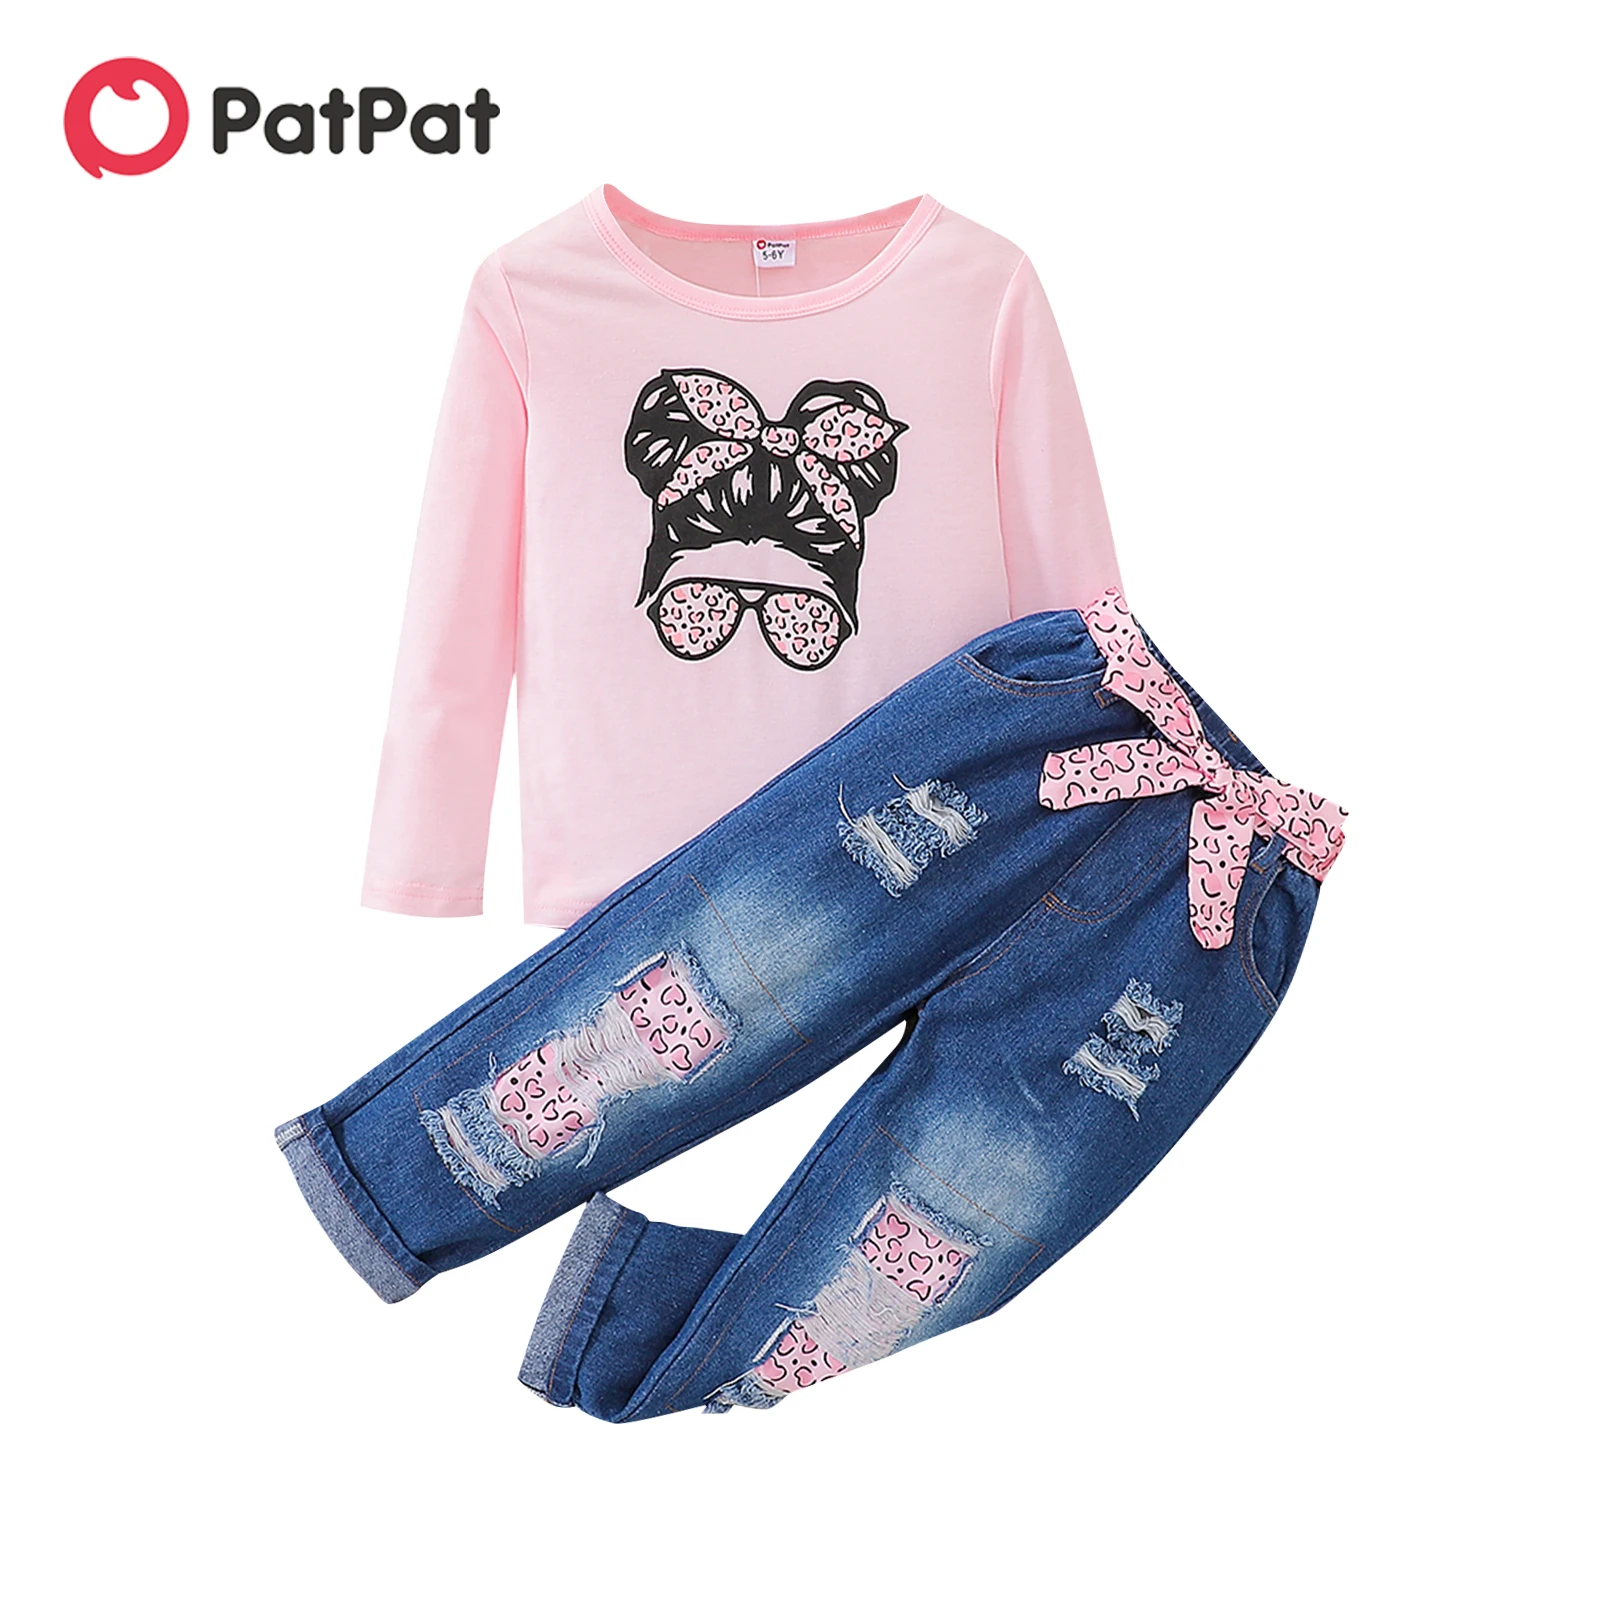 

PatPat 2pcs Kid Girl Figure Print Long-sleeve Pink Tee and Belted Ripped Denim Jeans Set